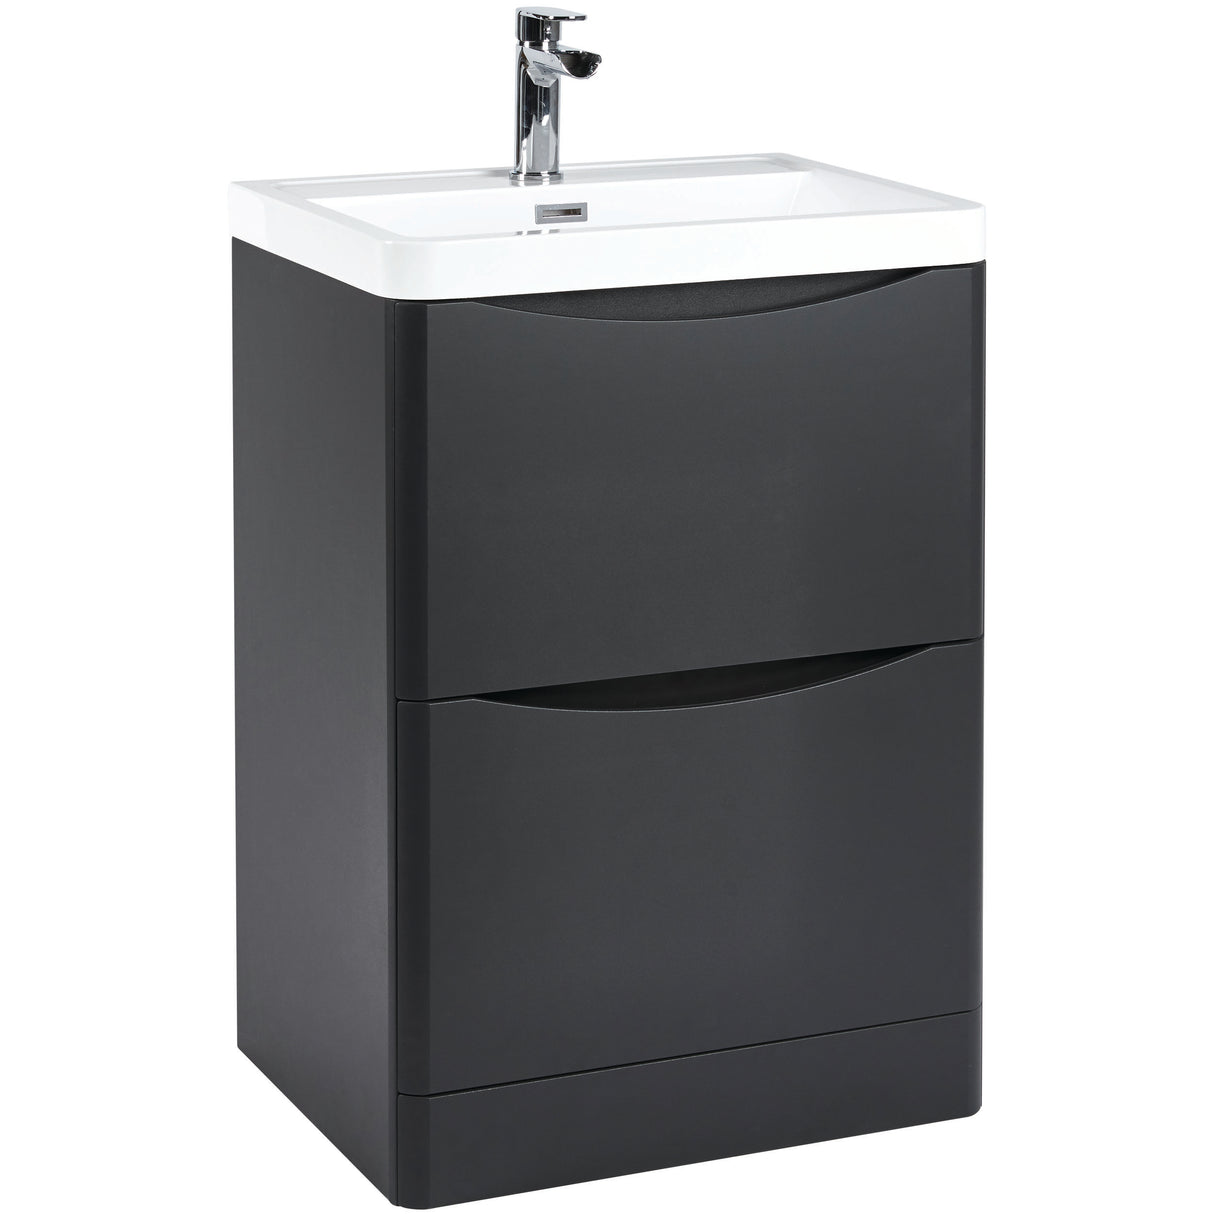 Floor Standing Vanity Unit 600mm With Basin Or Counter Top - 2 Colours !